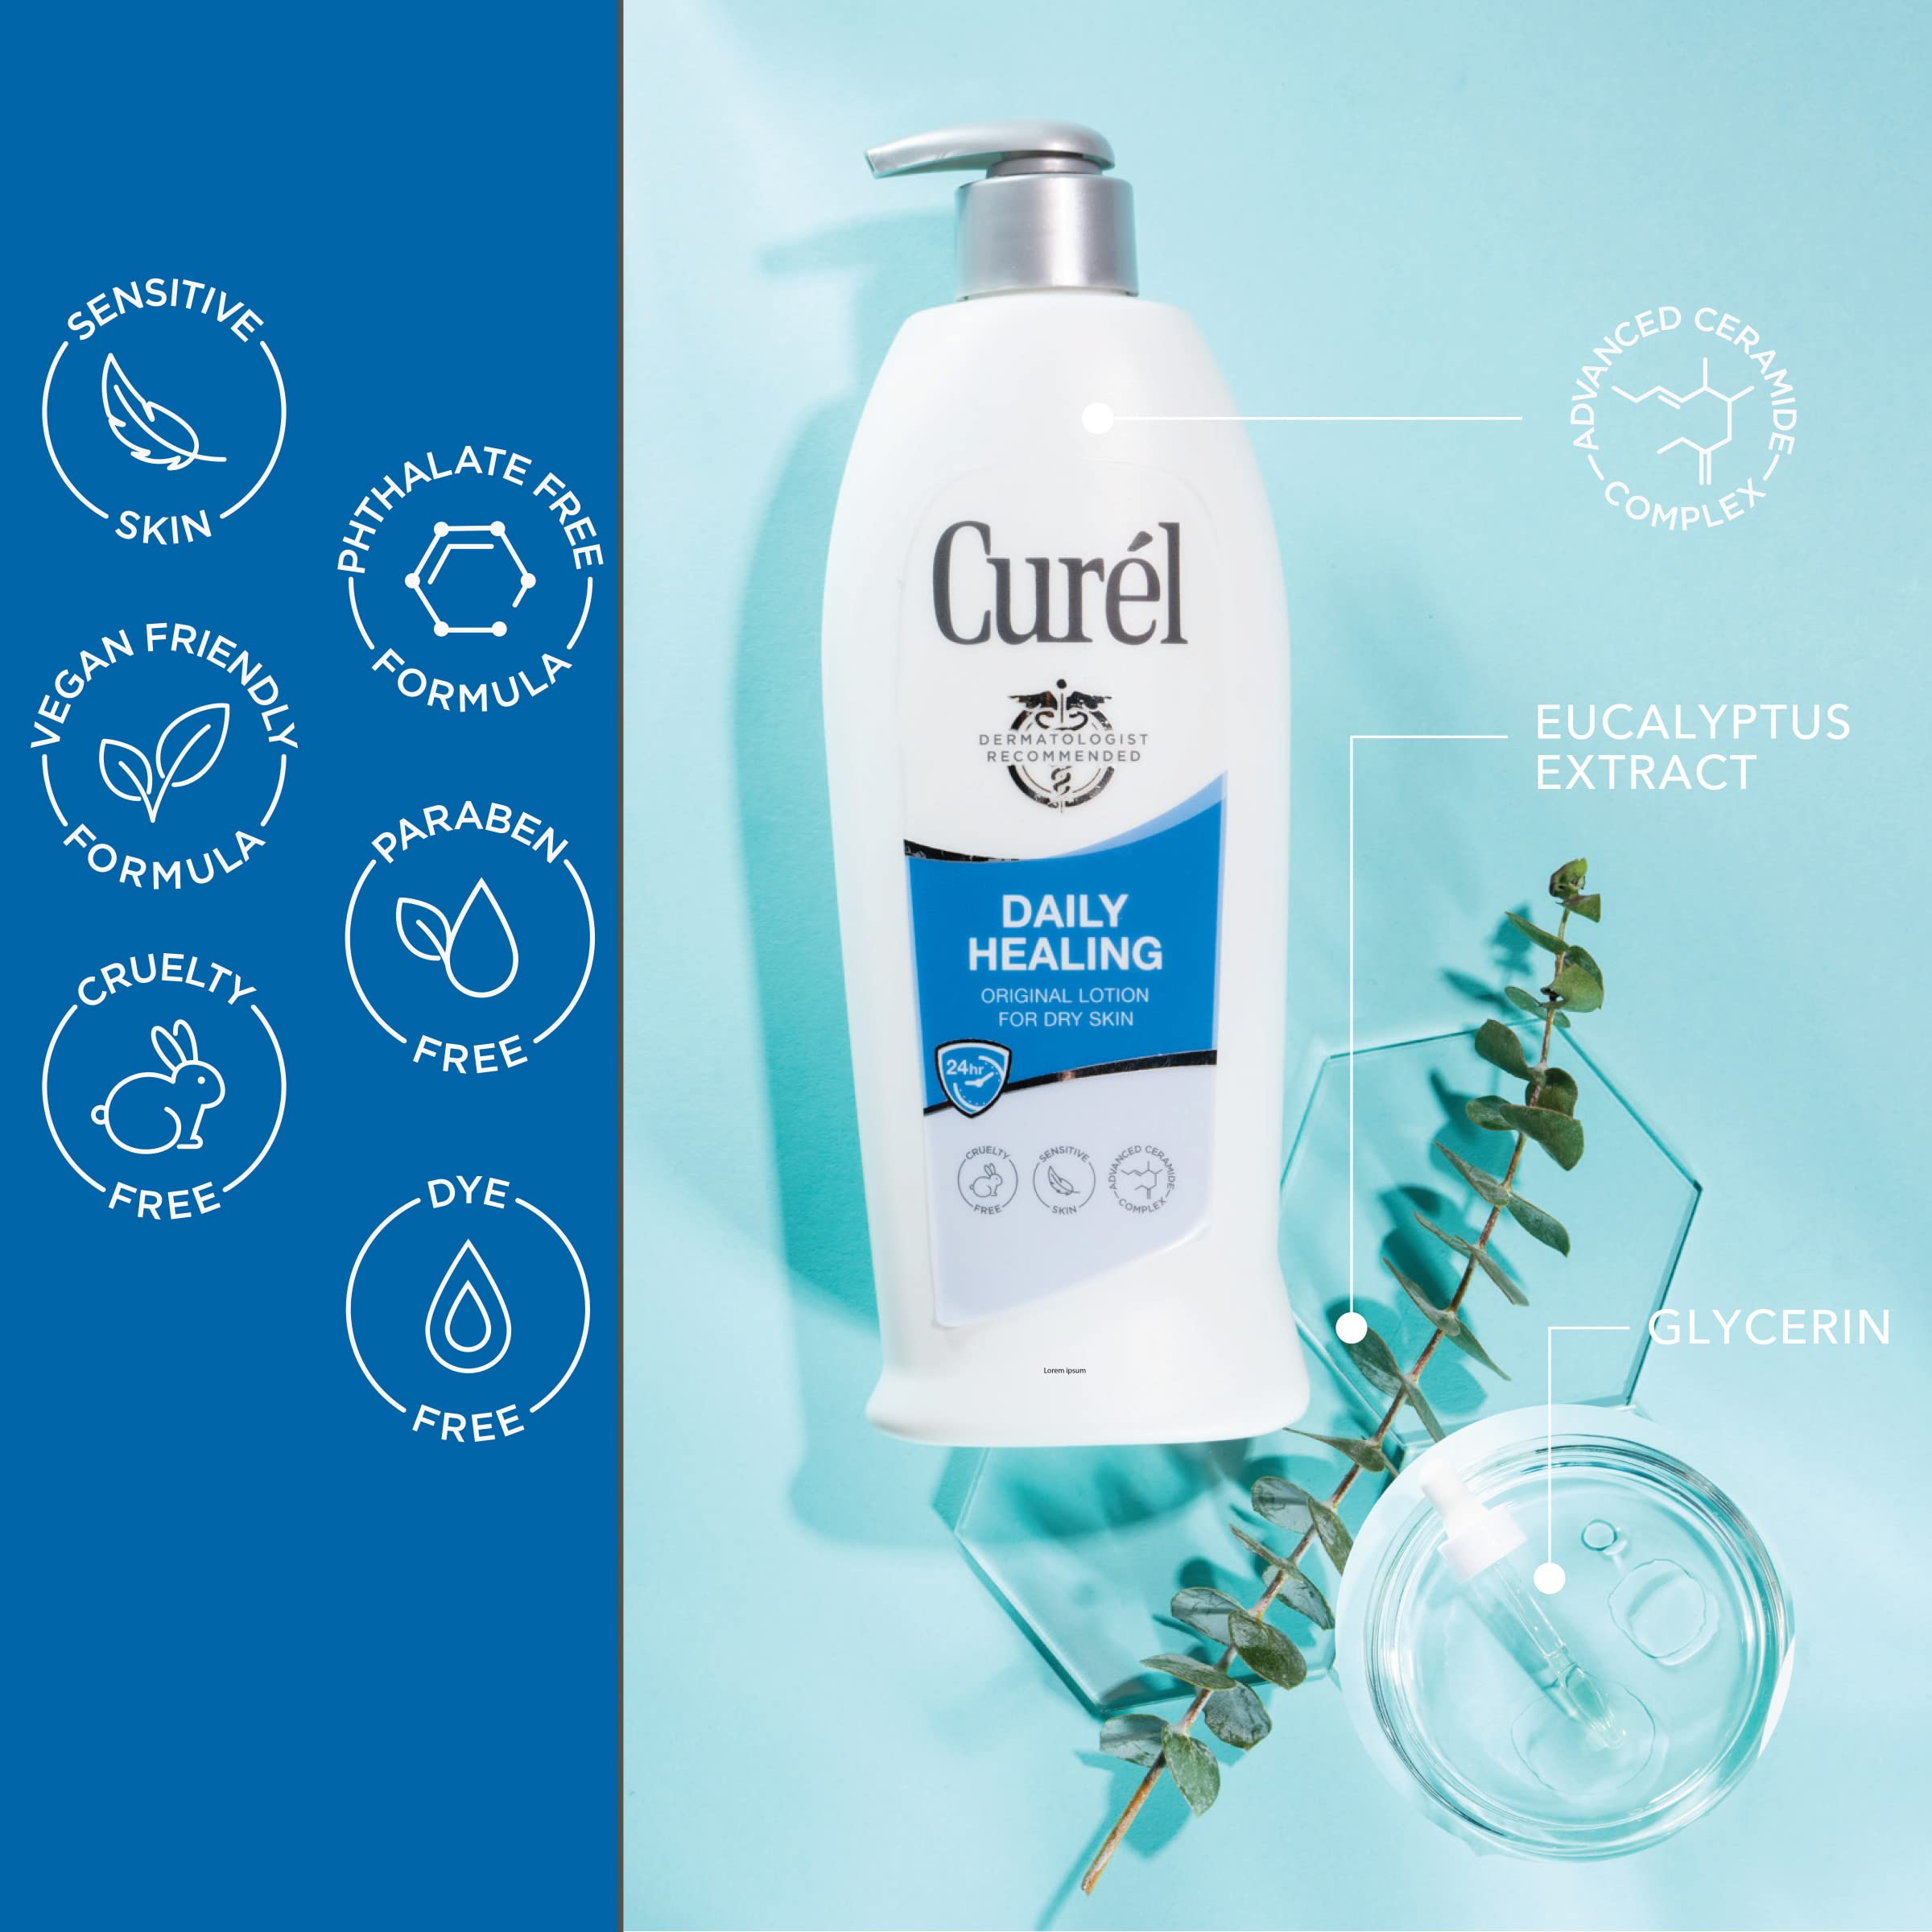 Curél Daily Healing Hand and Body Lotion, Moisturizer Nourishes Dry Skin with Advanced Ceramide Complex, Repairs Moisture Barrier, 13 Fl Ounces